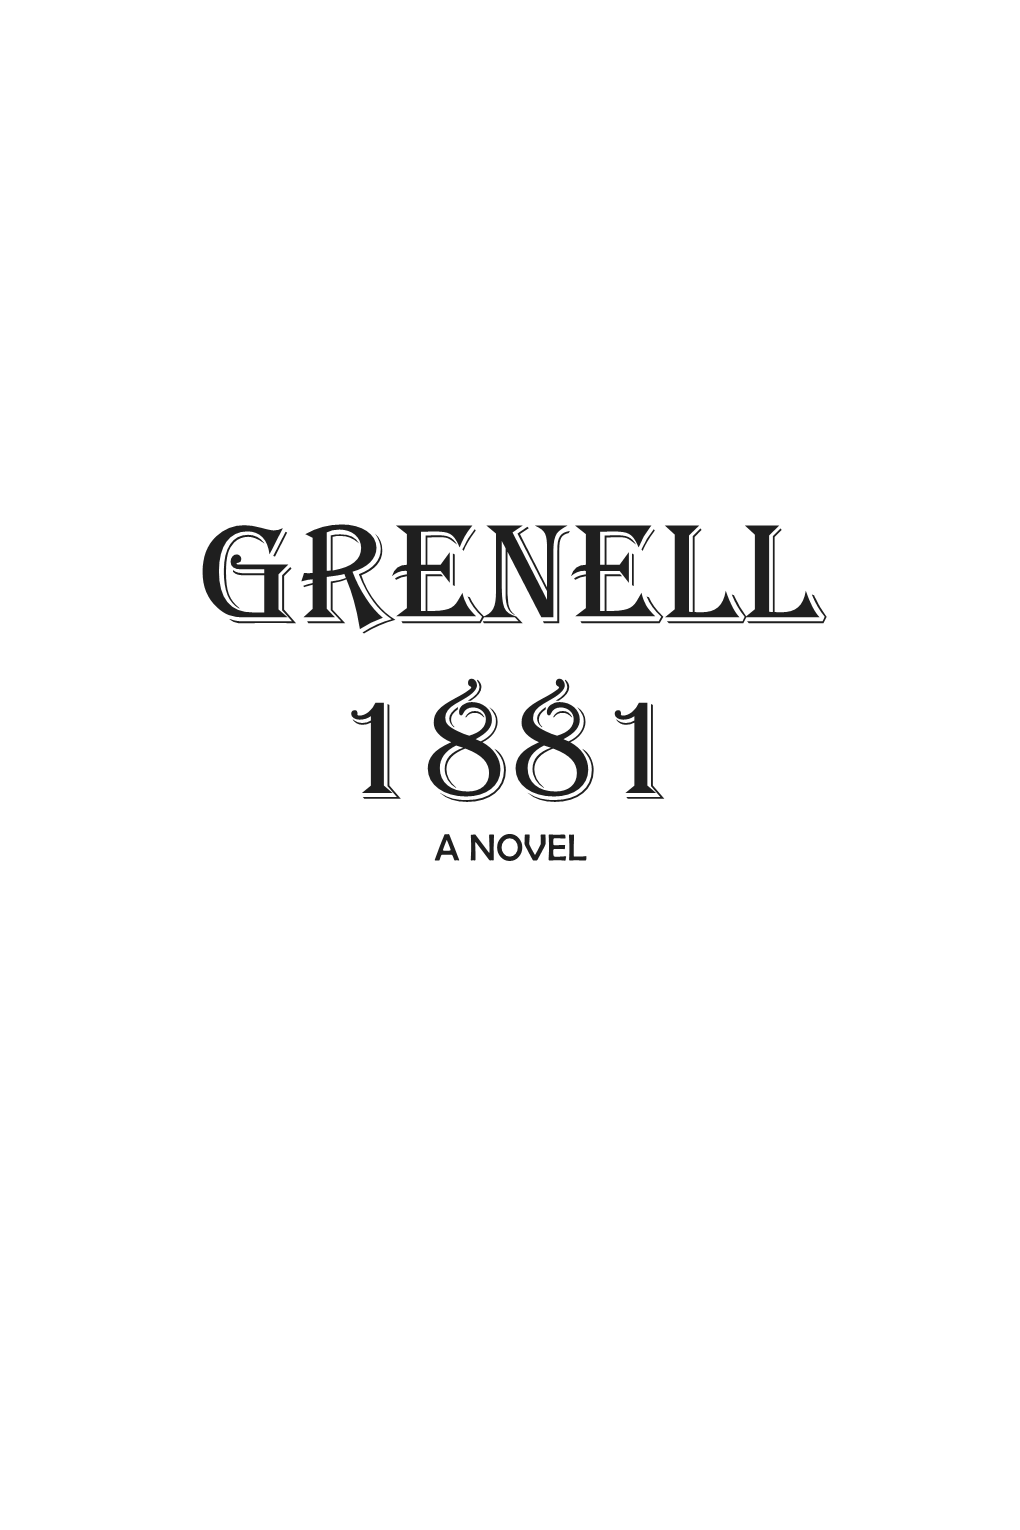 Grenell 1881 a NOVEL Grenell 1881 BOOK 1 in the THOUSAND ISLANDS SERIES